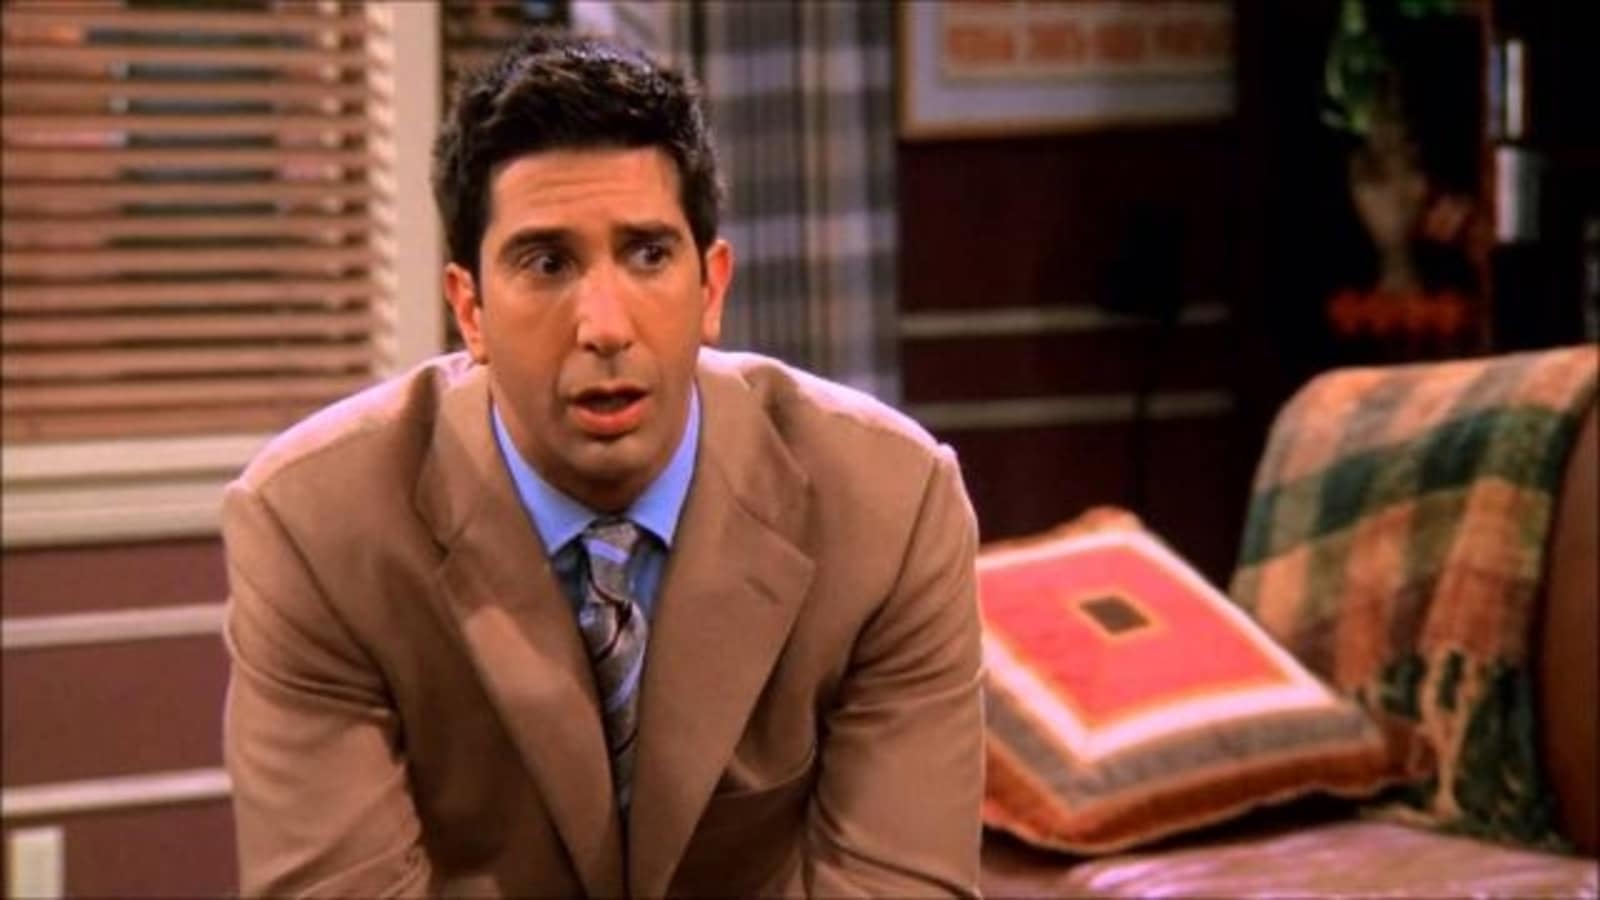 Friends star David Schwimmer slams doubt over Hamas sexual violence